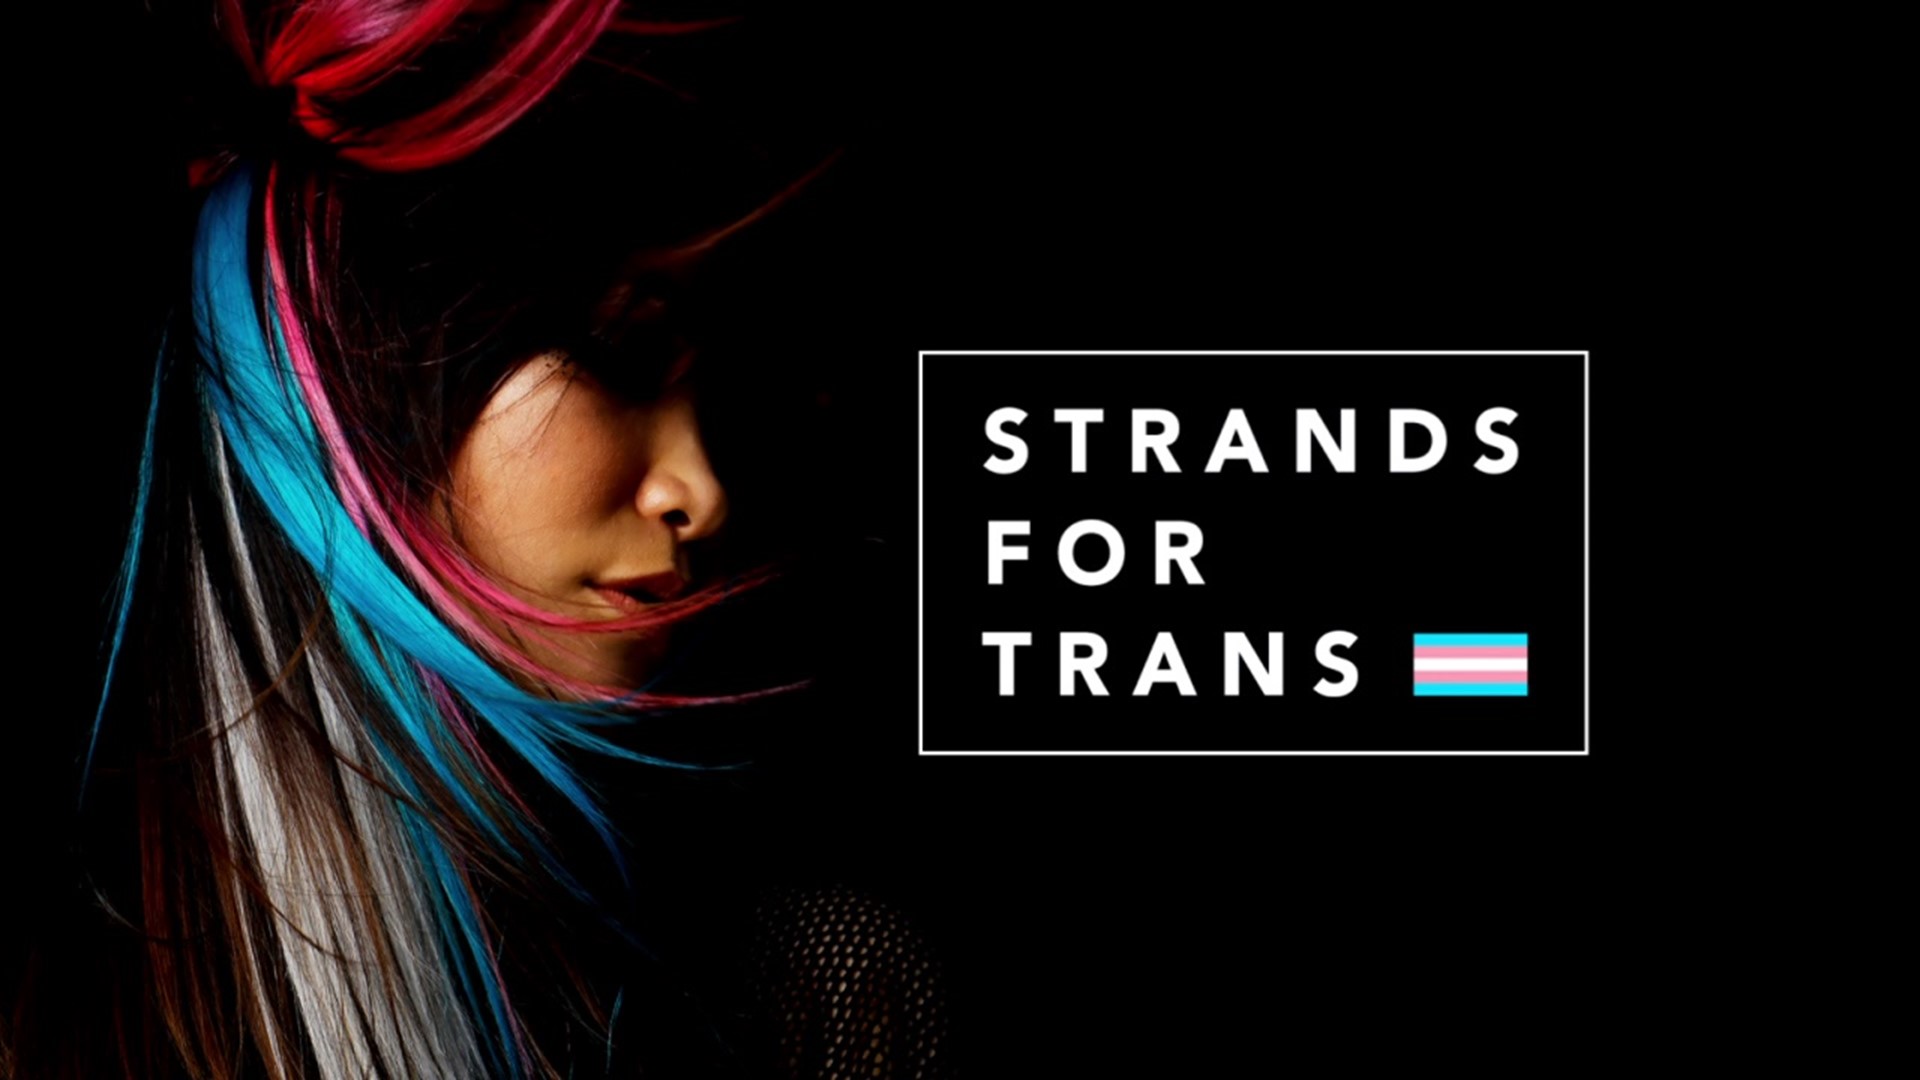 A salon in Lackawanna County is joining the movement to break the transgender stigma one strand at a time.